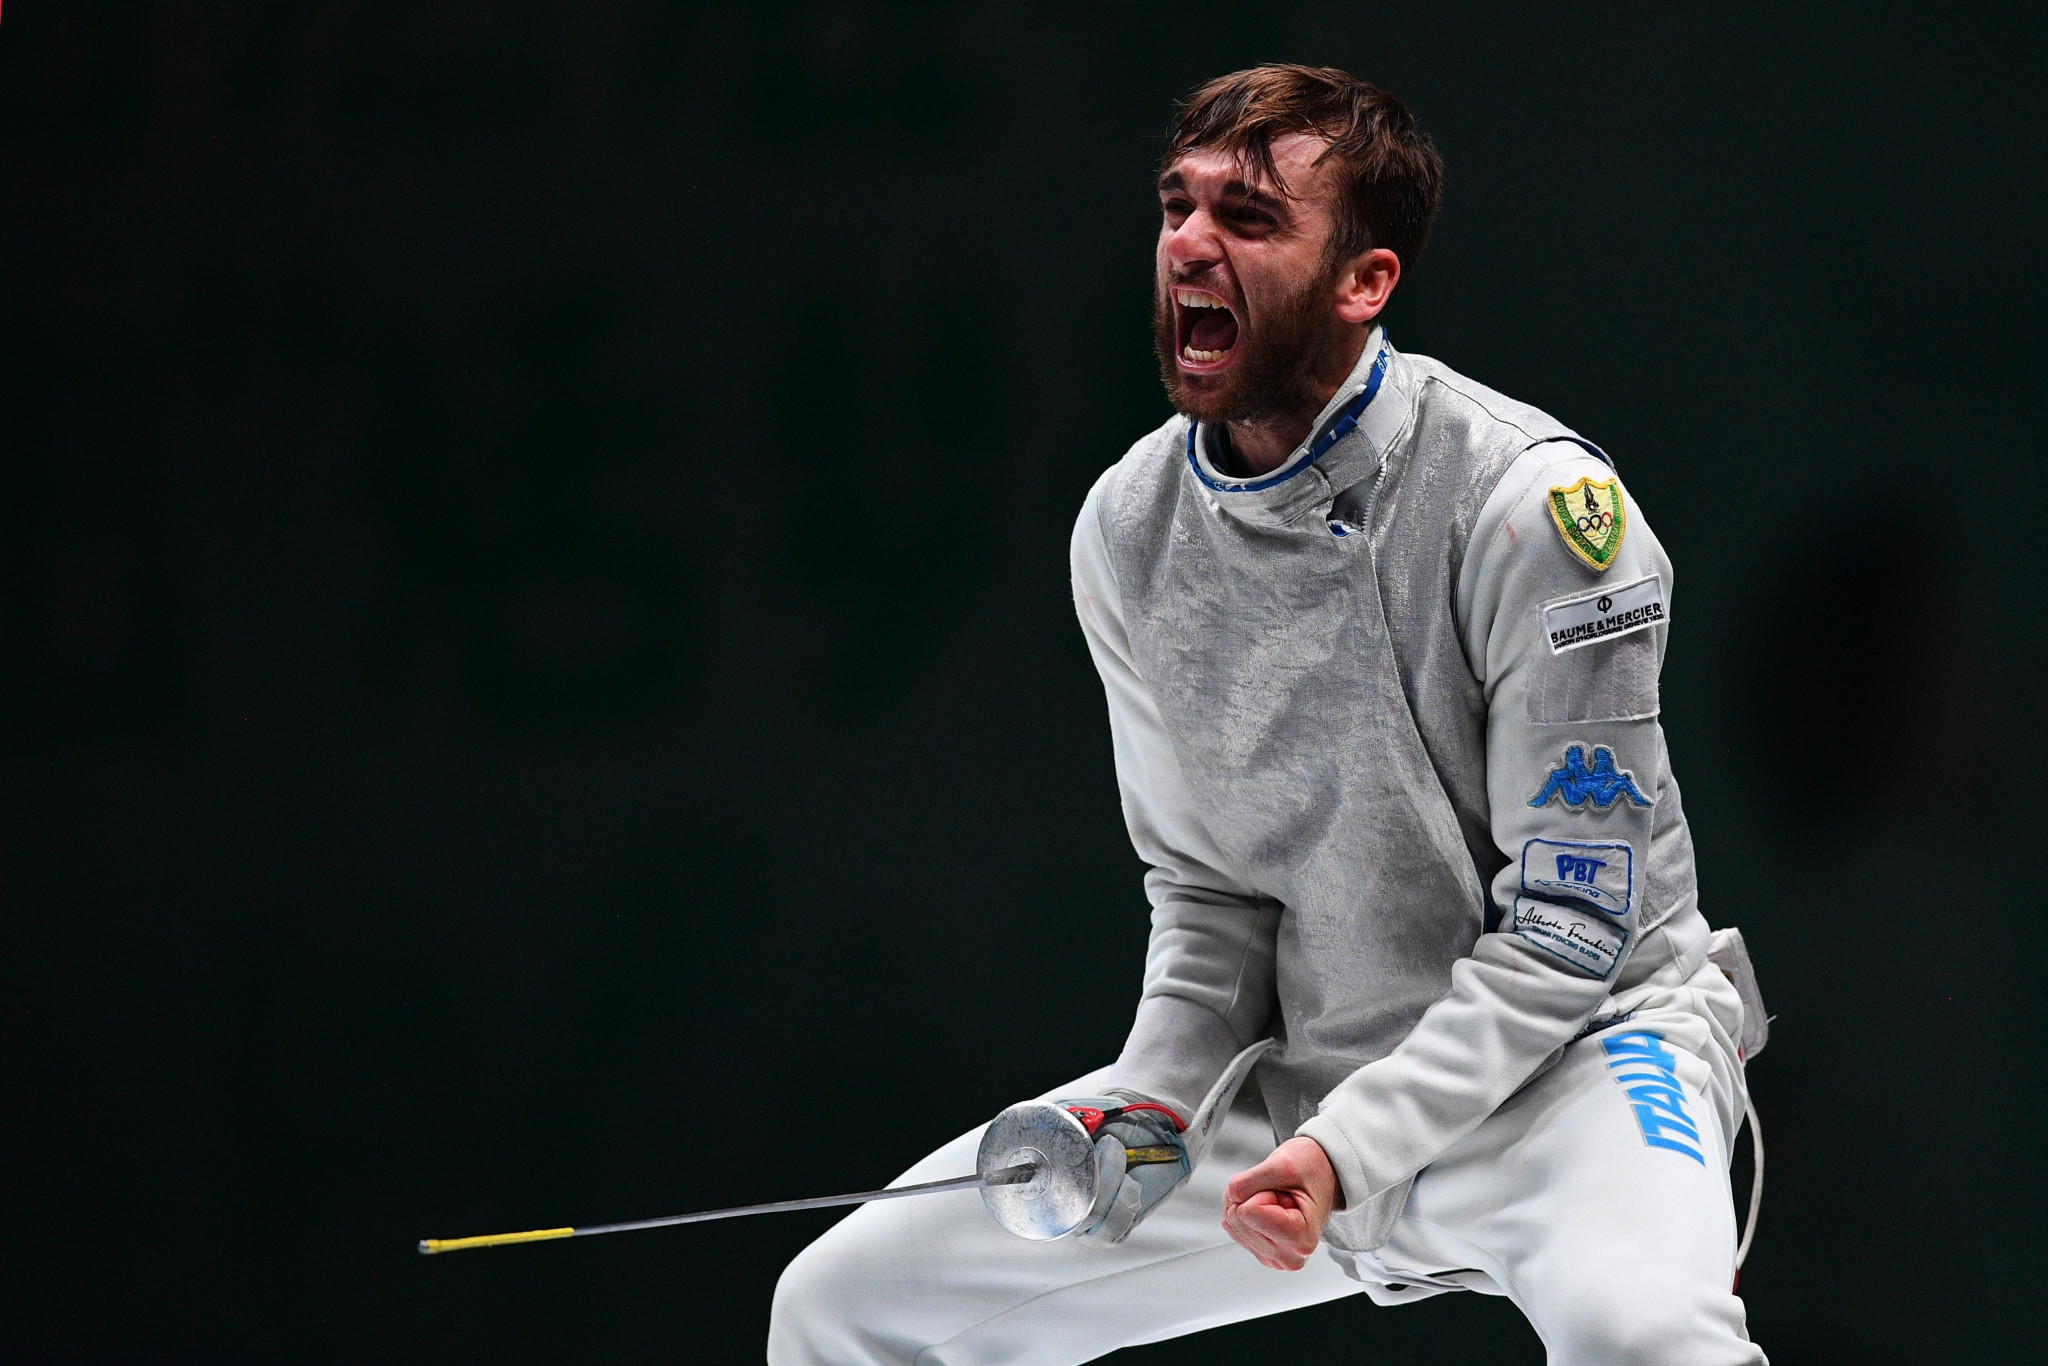 America's Philip Shin will face Italy's Olympic champion Daniele Garozzo in the main round of the FIE Foil Grand Prix in Anaheim after beating Austria's Mortiz Lechner and team-mate Brian Kaneshige ©Getty Images